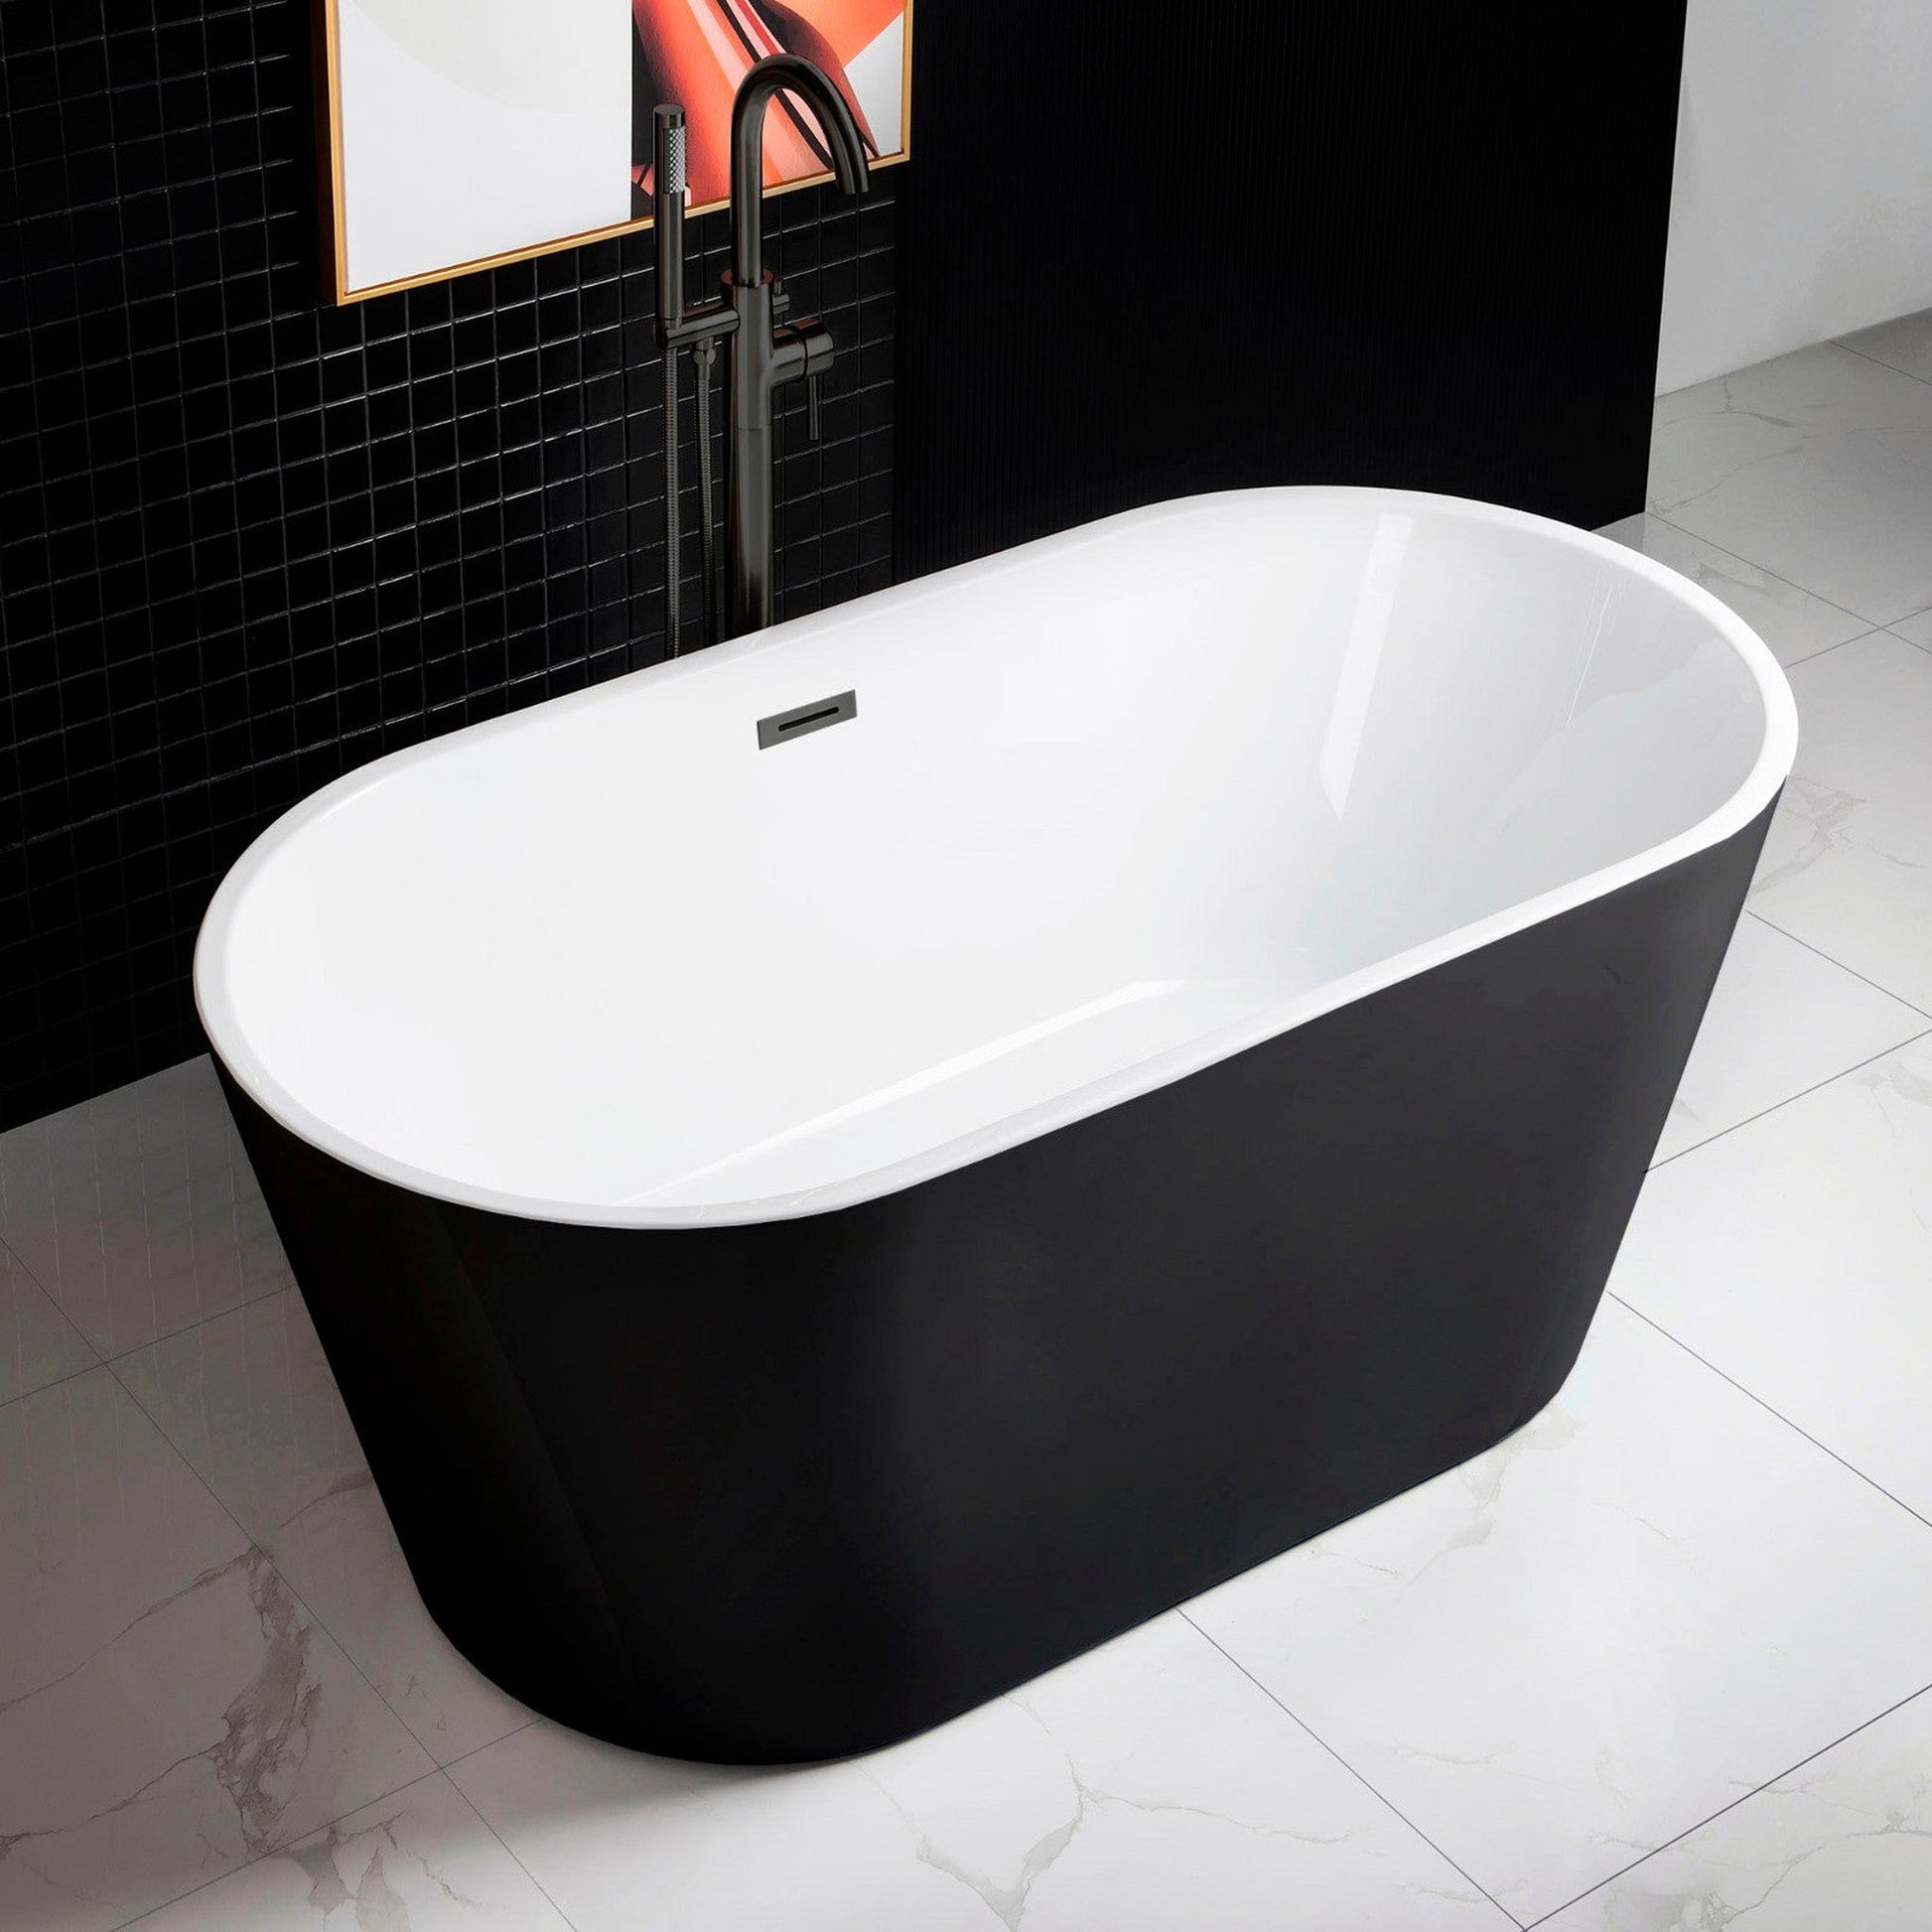 WoodBridge 59" Black Acrylic Freestanding Contemporary Soaking Bathtub With Matte Black Drain, Overflow, F0072MBVT Tub Filler and Caddy Tray